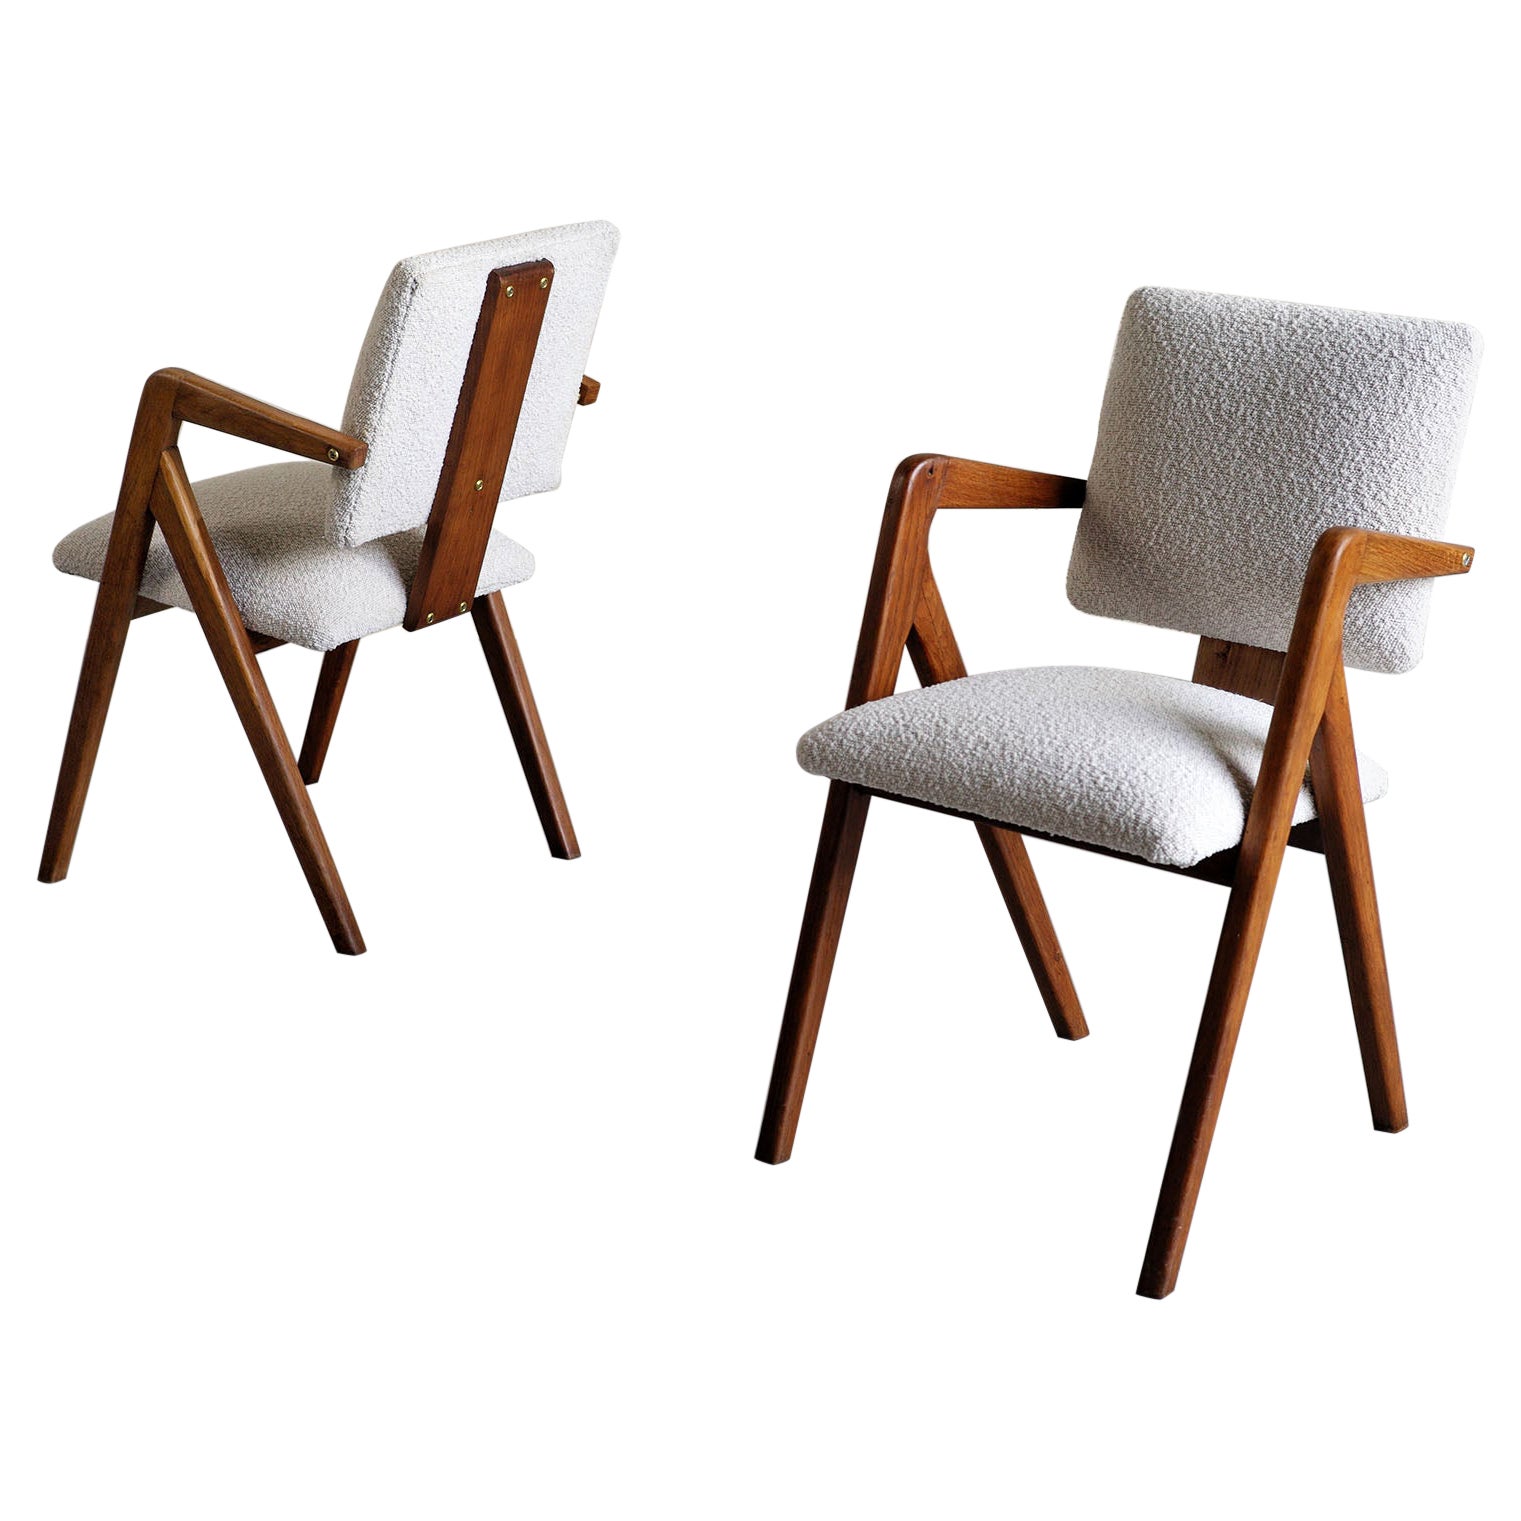 Lucienne and Robin Day, Pair of Armchairs Hillestak, England, 1950 For Sale